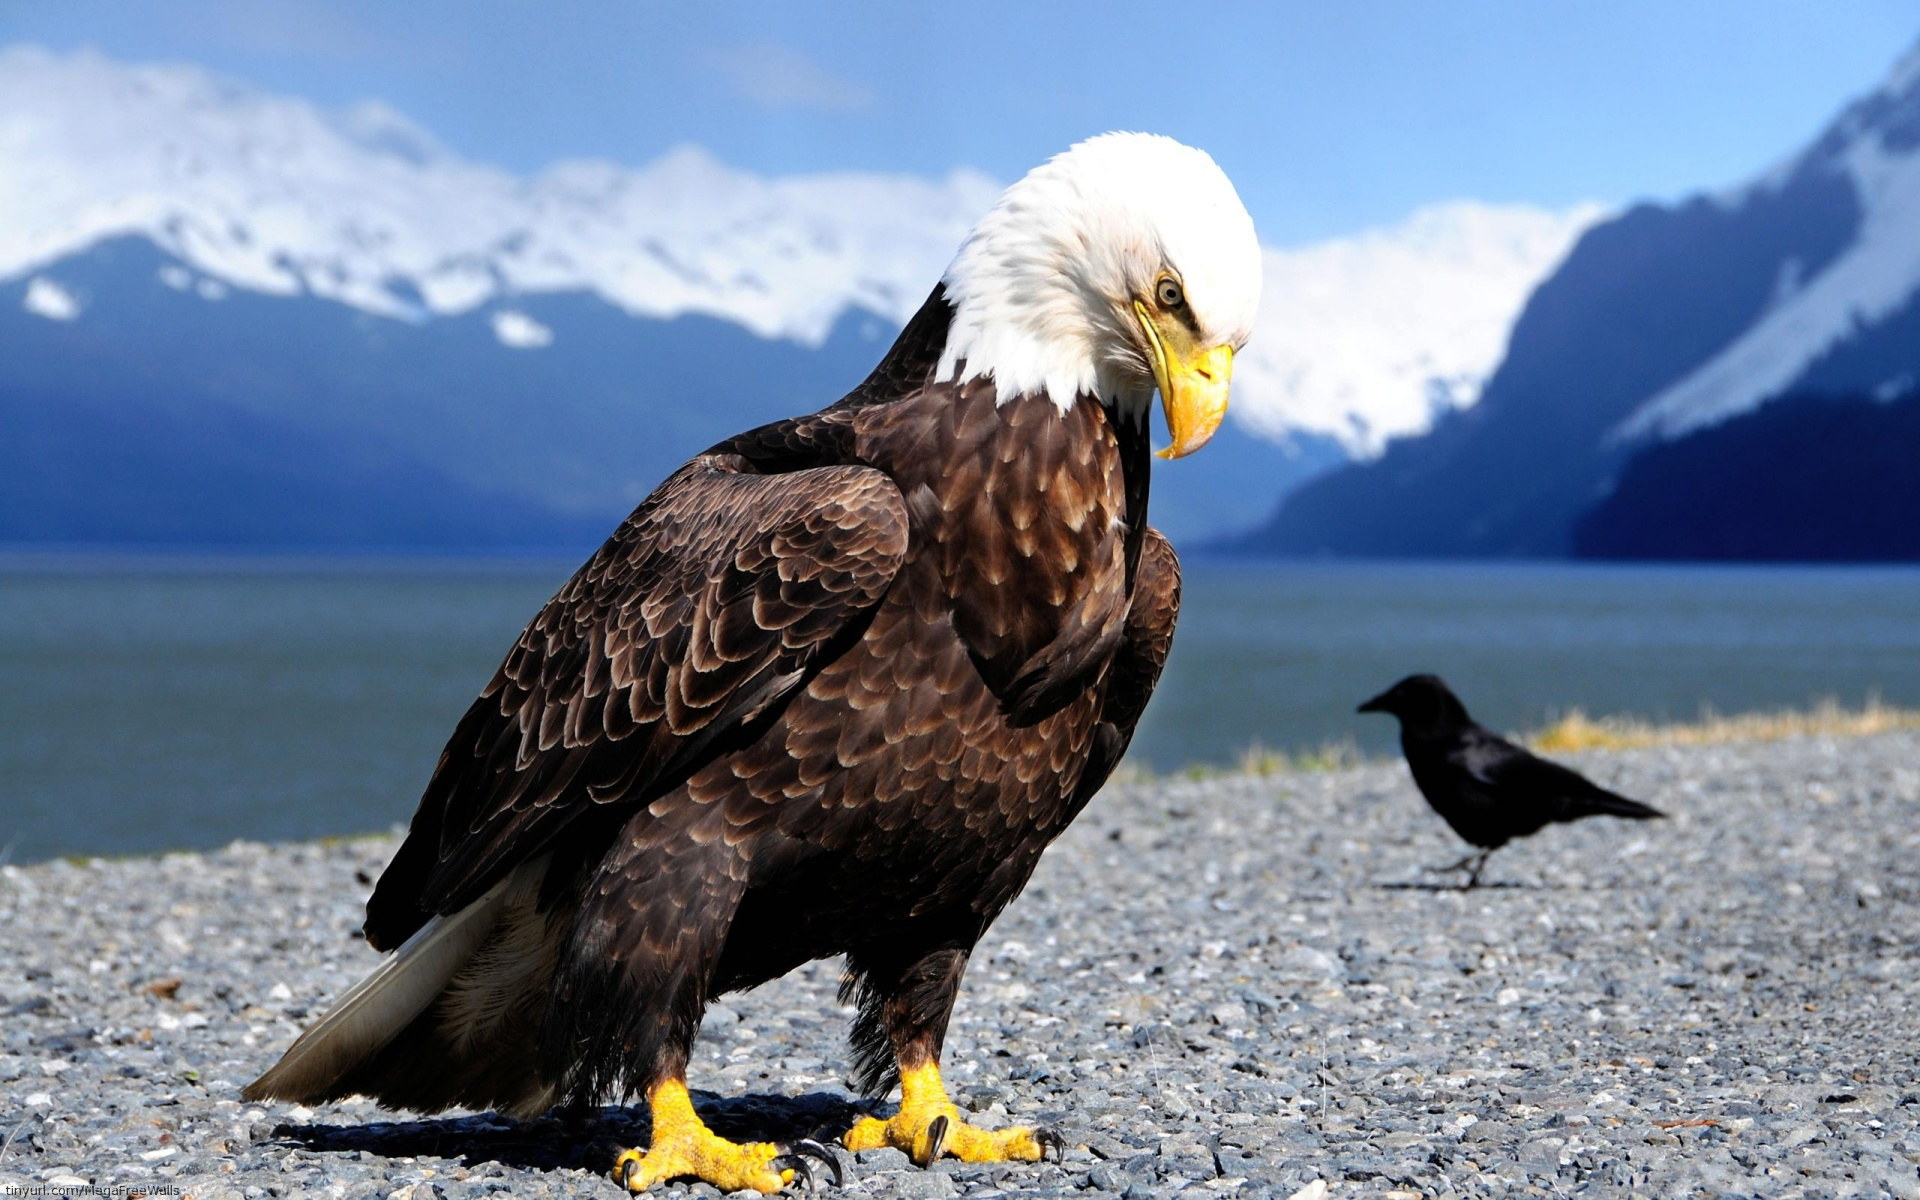 High Definition eagle wallpaper for free download